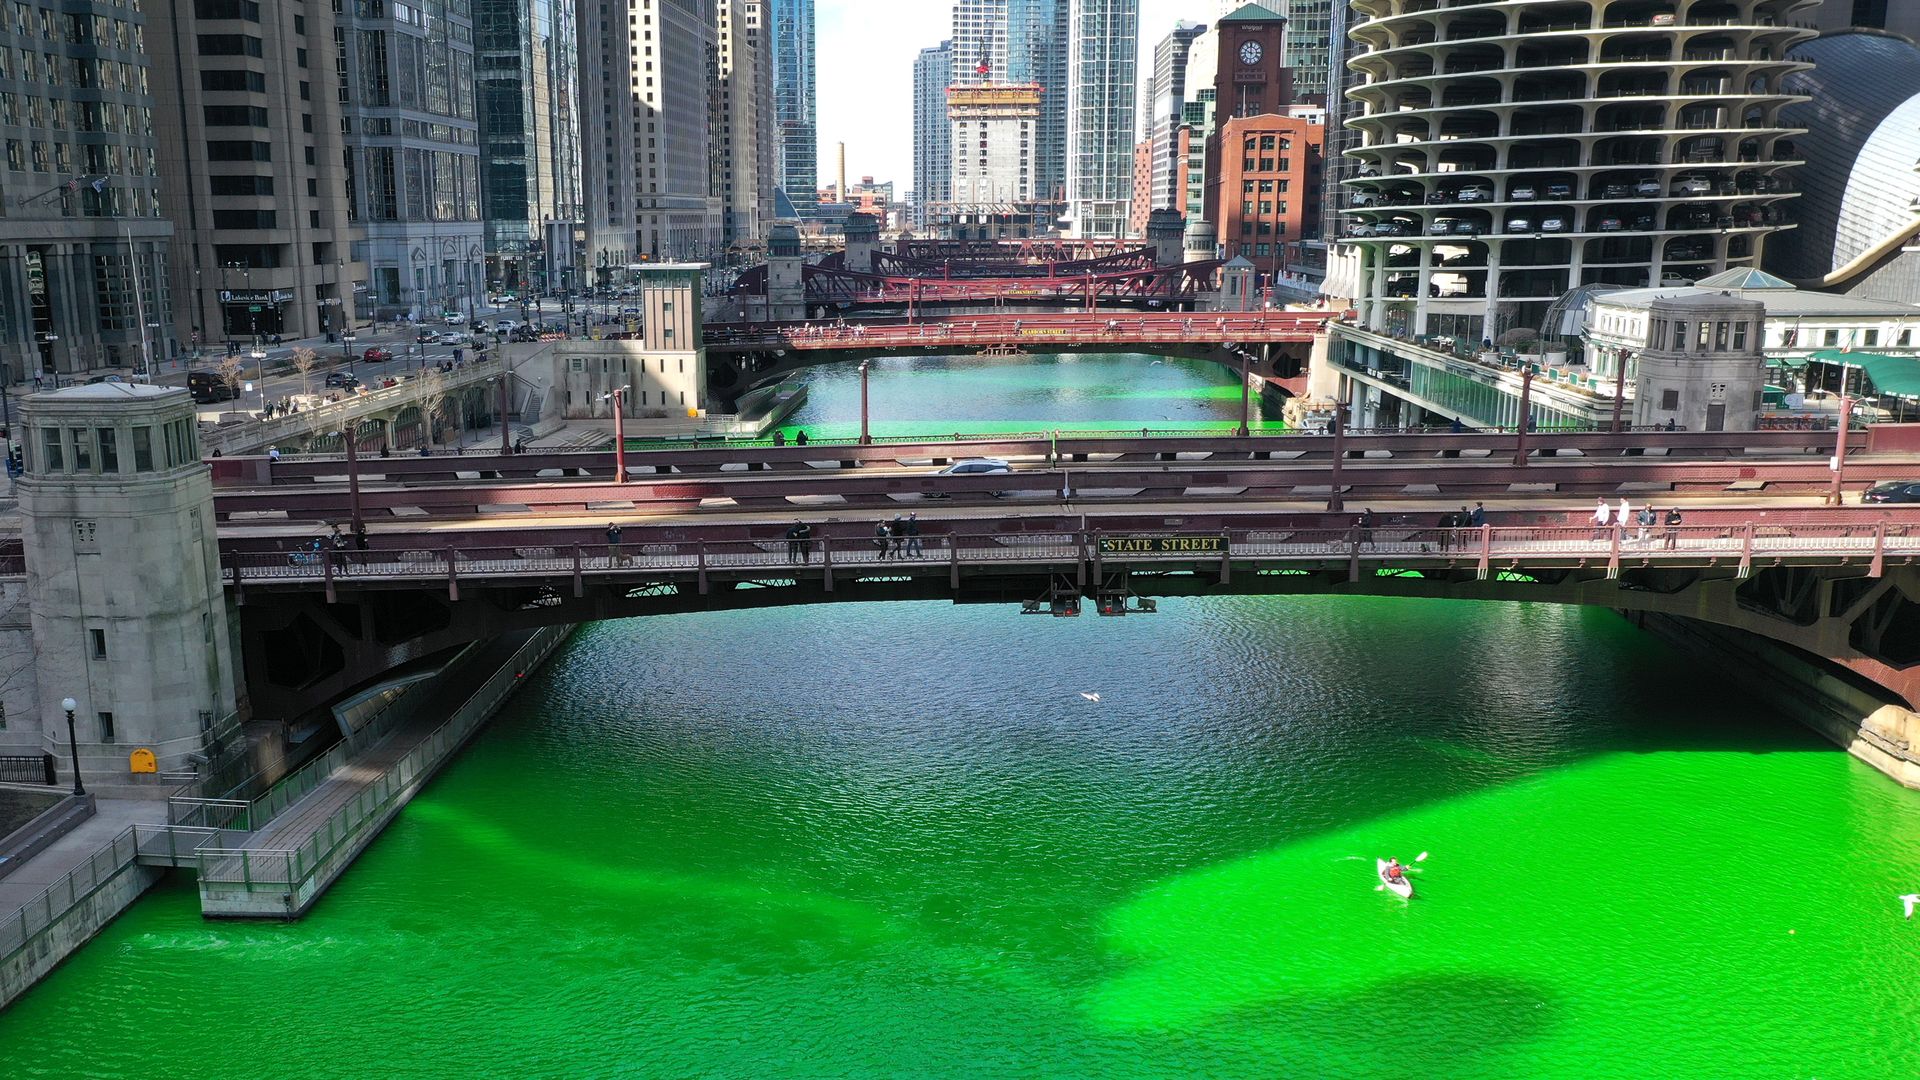 An aerial picture shot with a drone shows the Chicago River as it flows through downtown after it was dyed green in celebration of St. Patrick's Day.